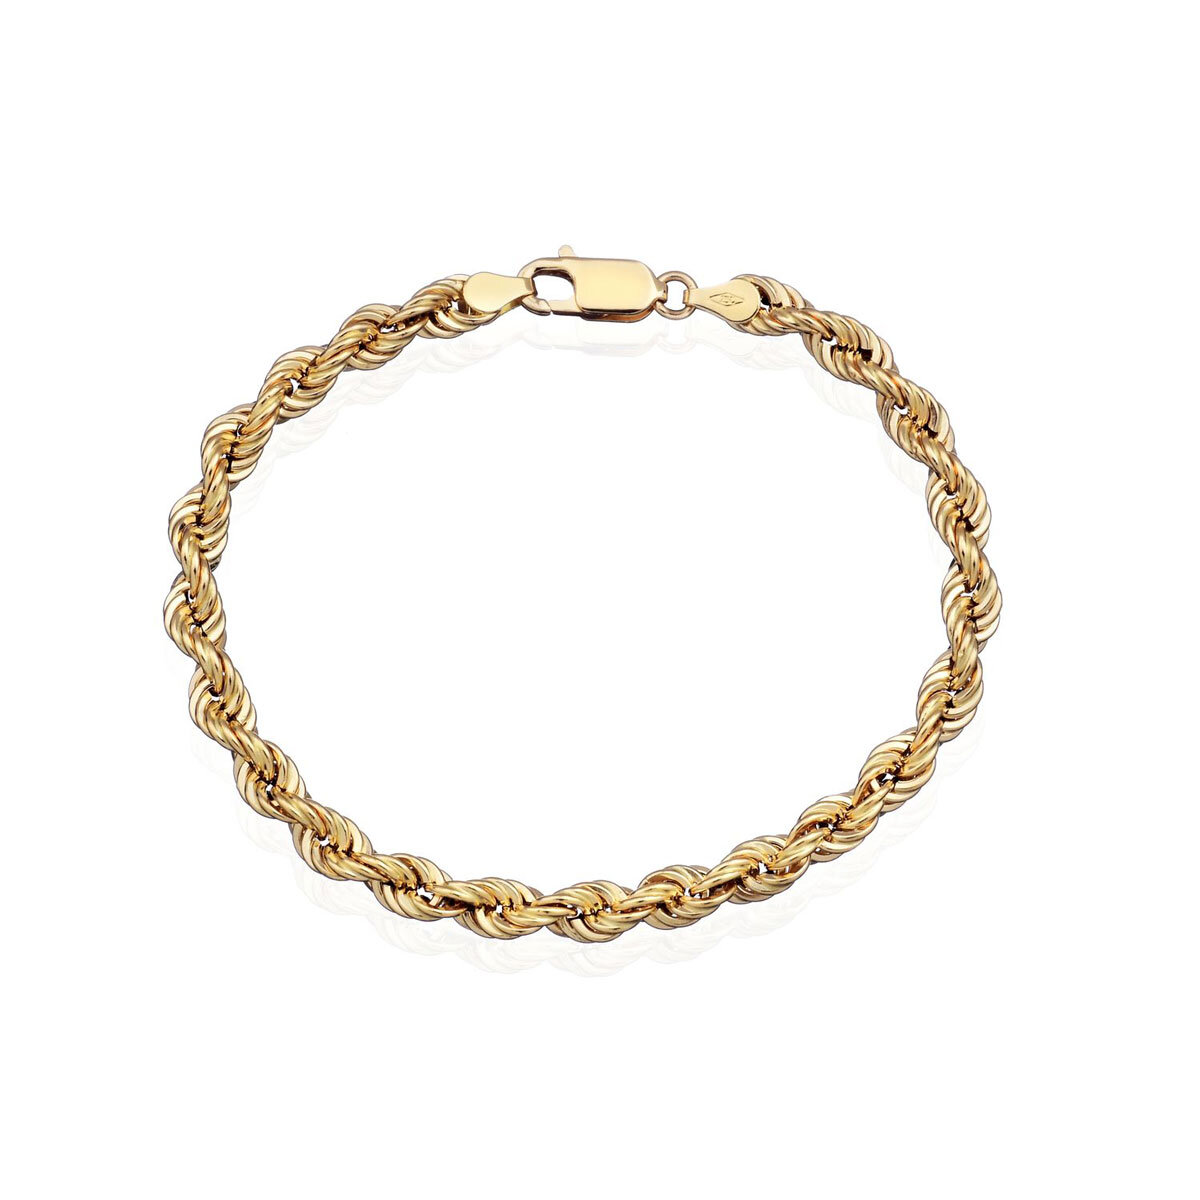 Costco.co.uk | 14ct Yellow Gold Rope Chain Bracelet | Cos...